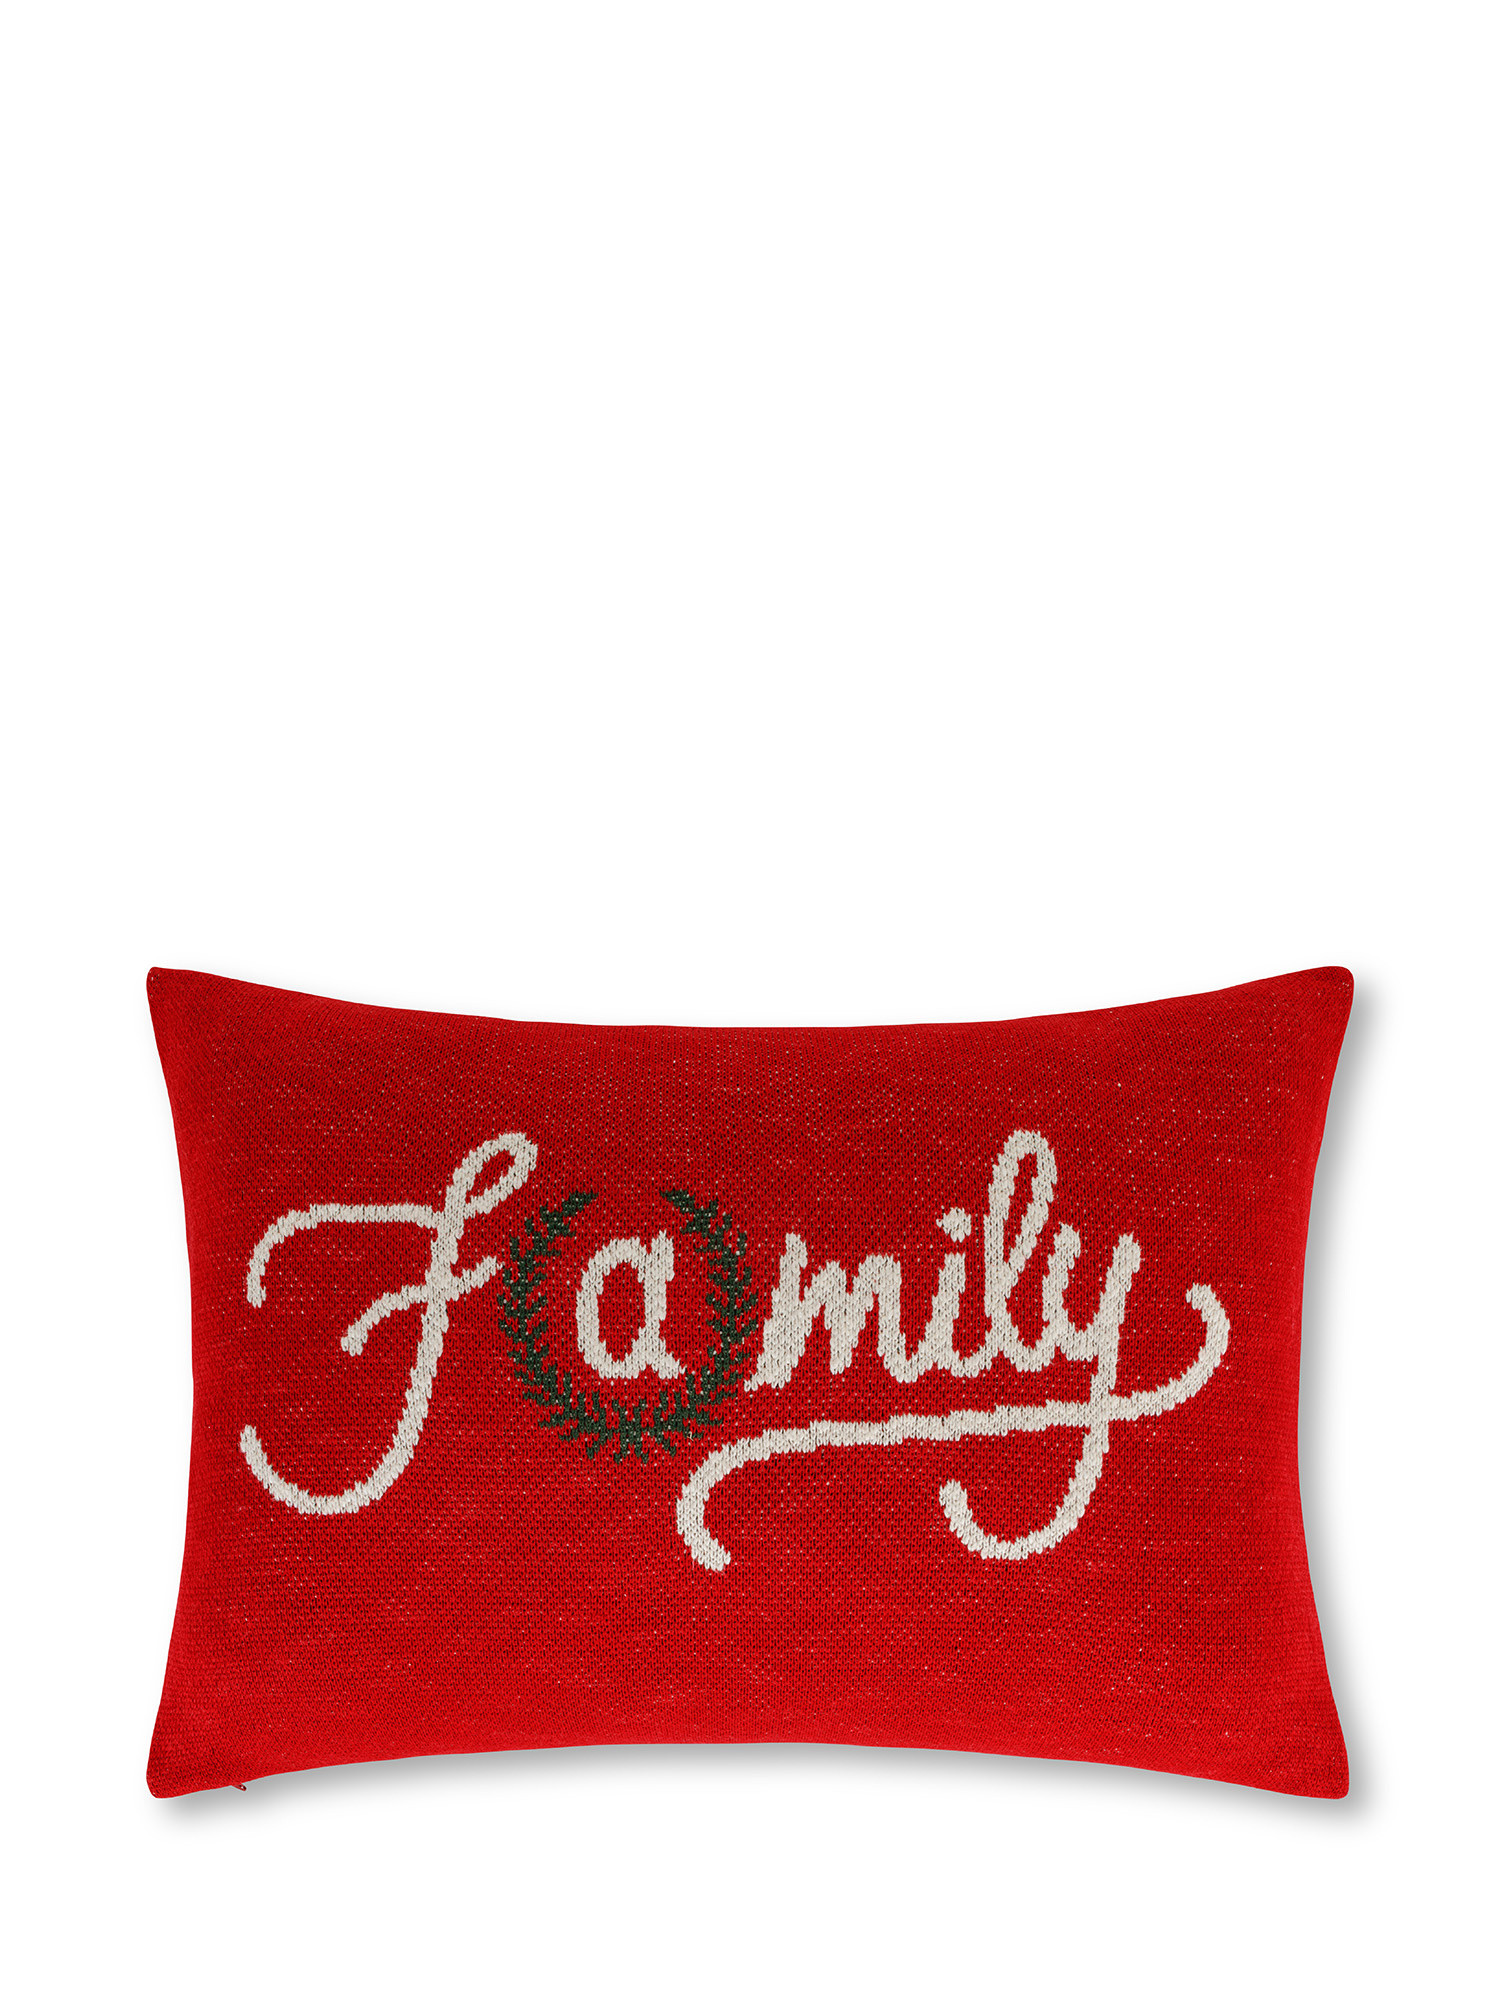 Jacquard knit cushion with writing 40x60 cm, Red, large image number 0